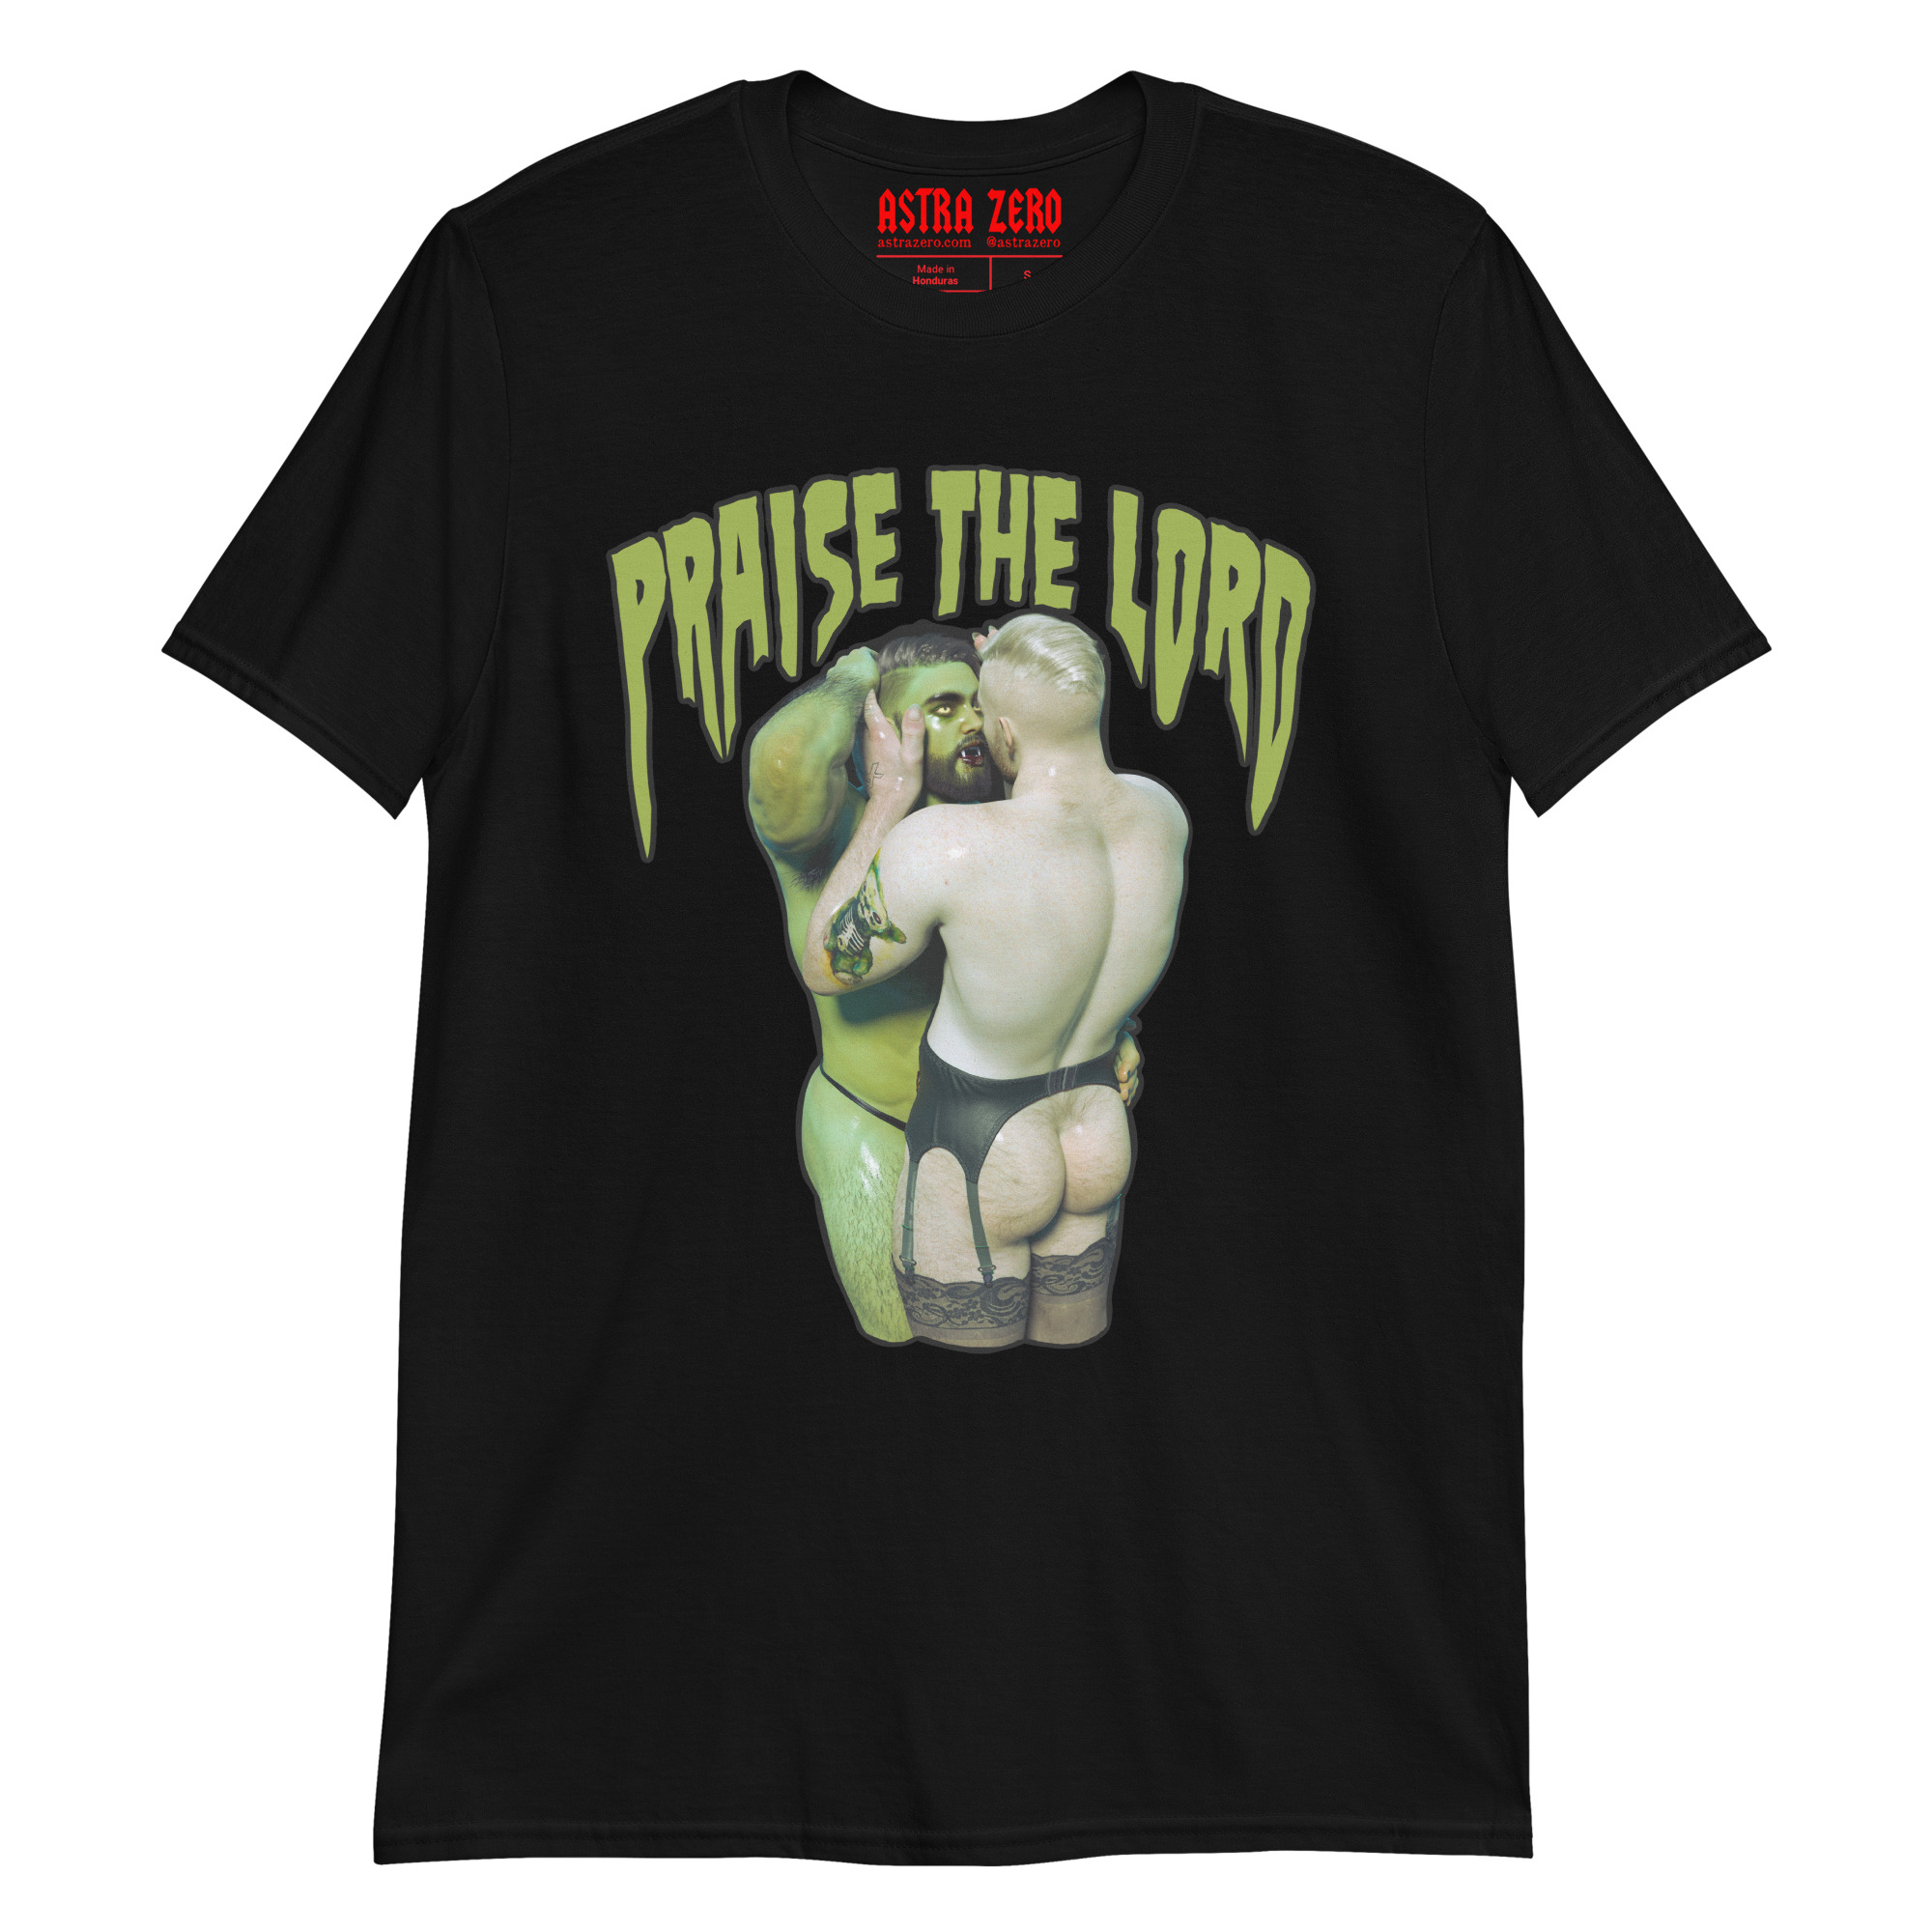 Featured image for “Praise the lord - Short-Sleeve Unisex T-Shirt”